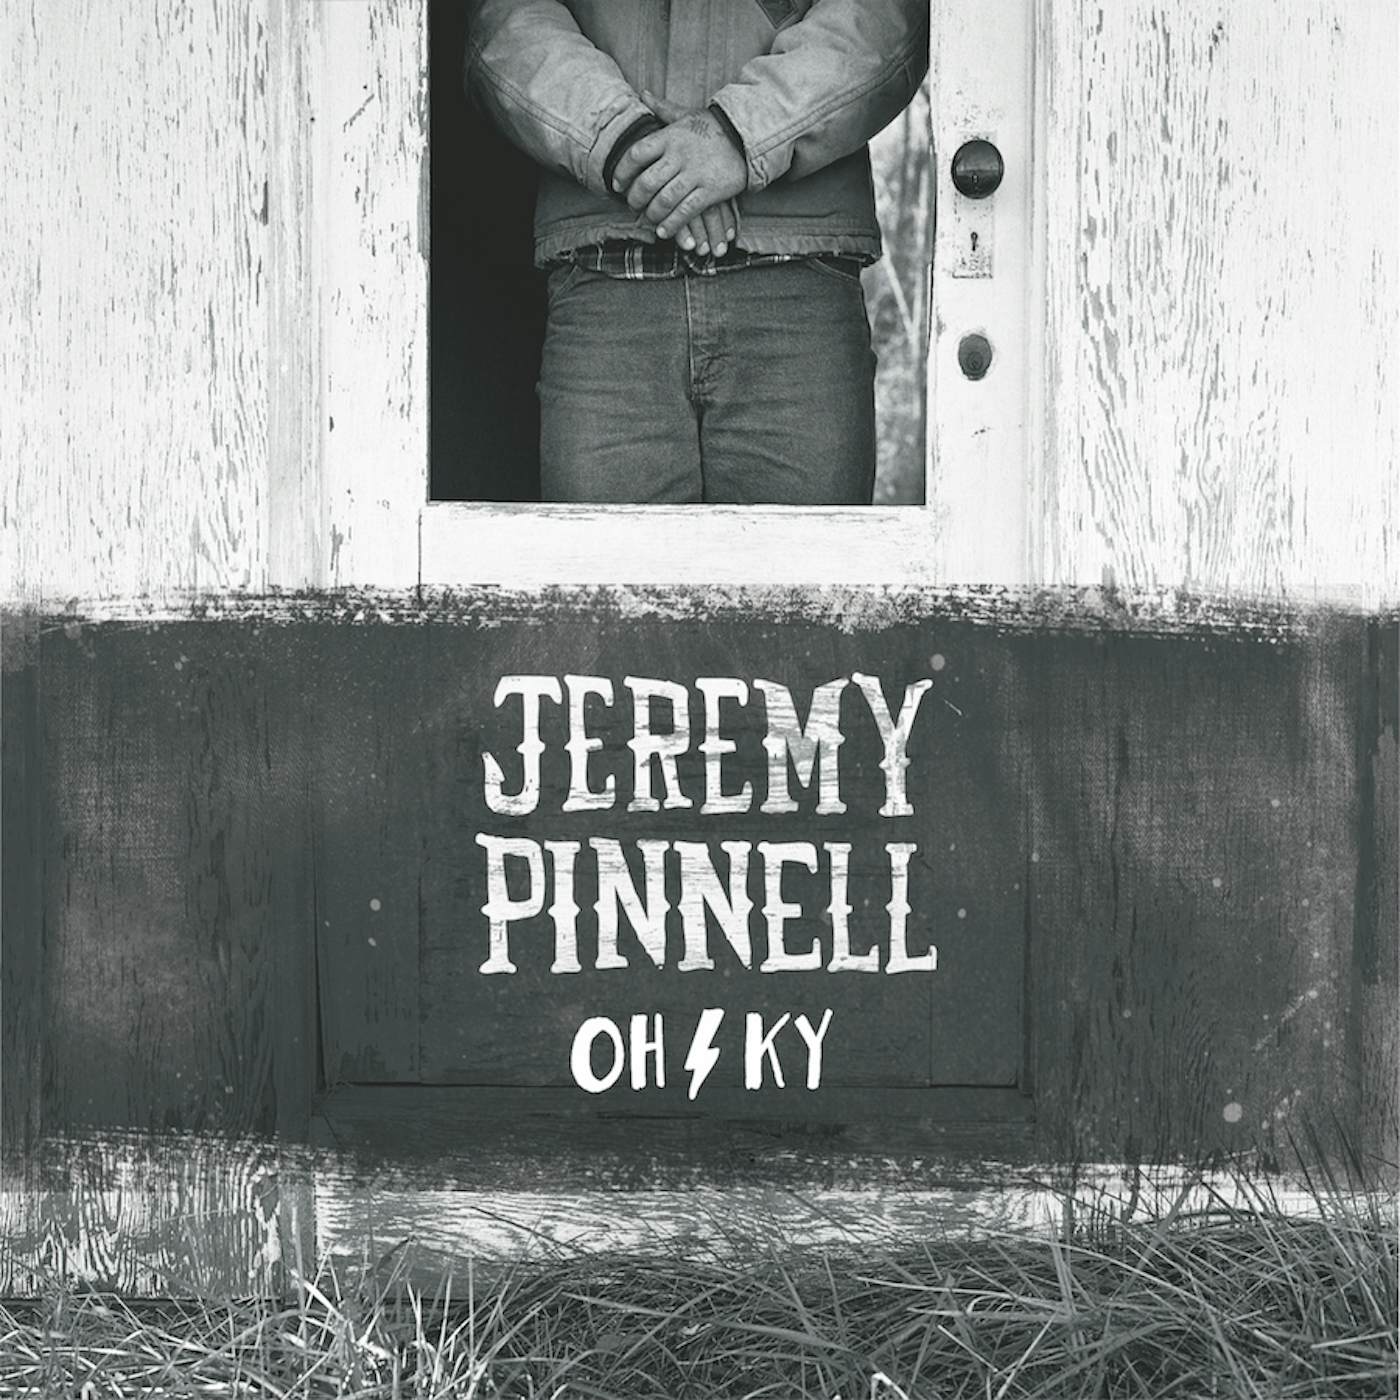 Jeremy Pinnell OH/KY LIVE AT CANDYLAND STUDIOS Vinyl Record